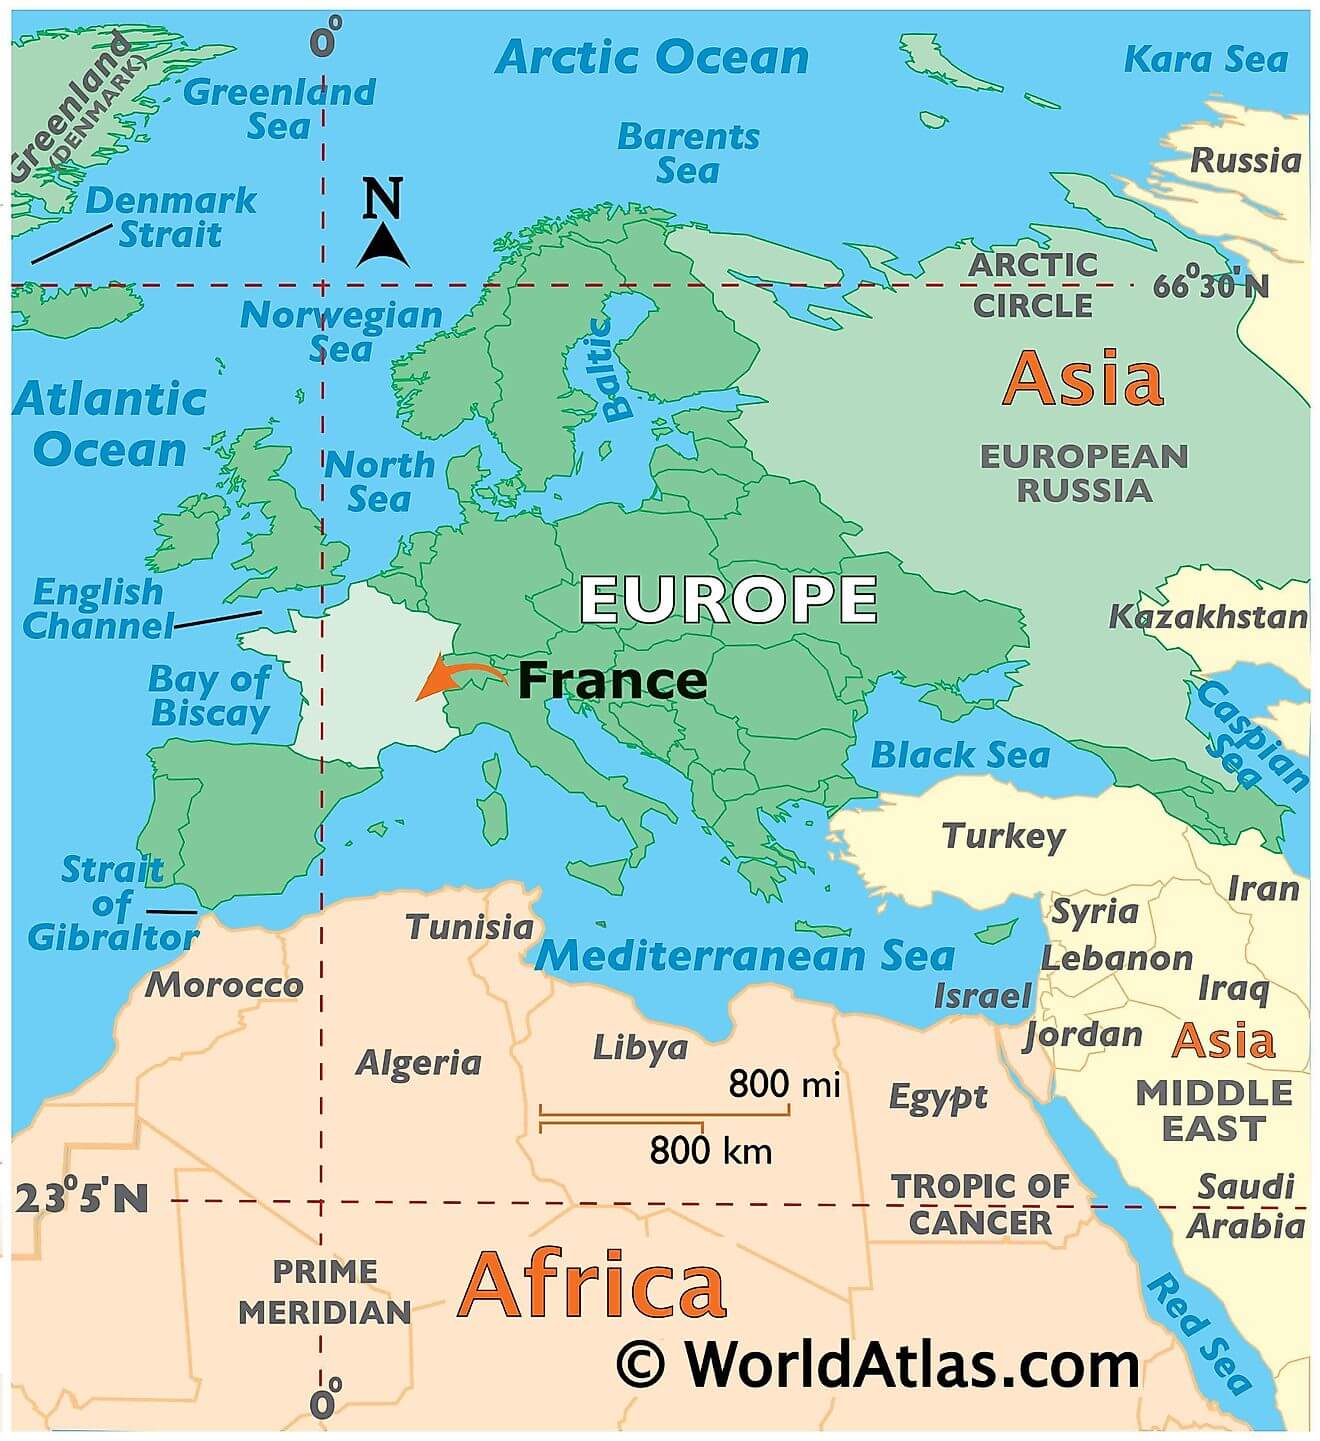 Where is France?